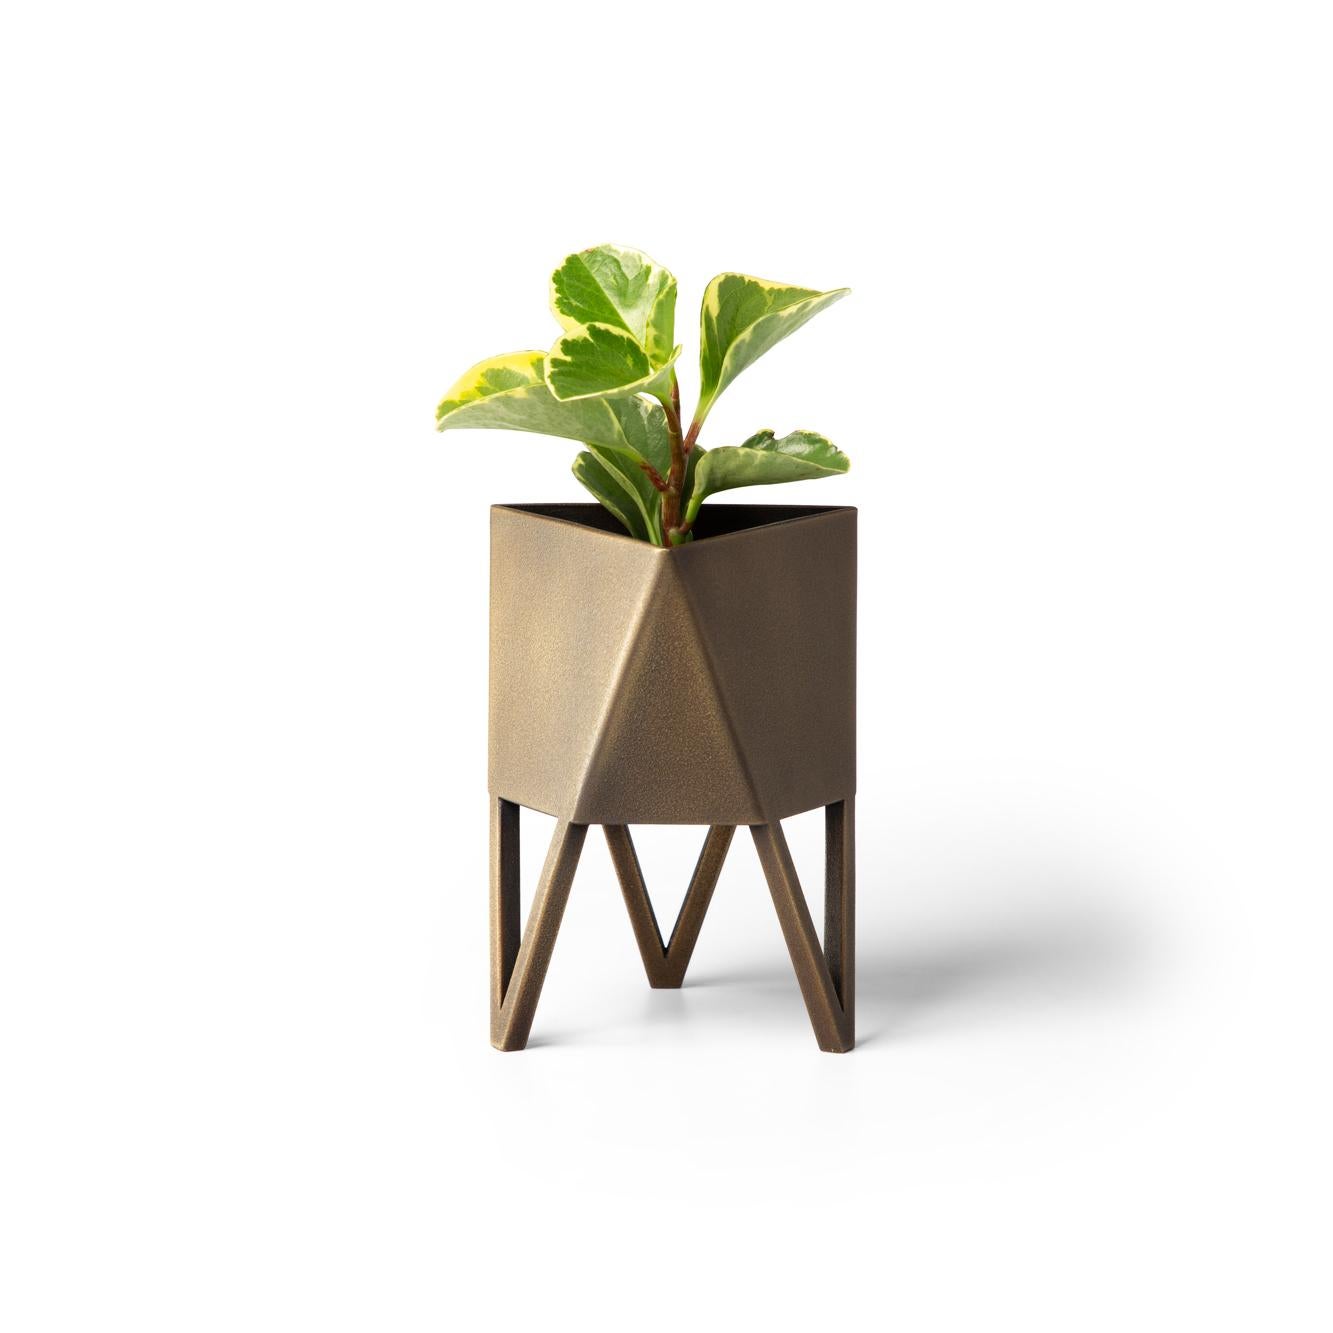 Deca Planter in Mars By Force/Collide, Size Large, 2023 For Sale 9